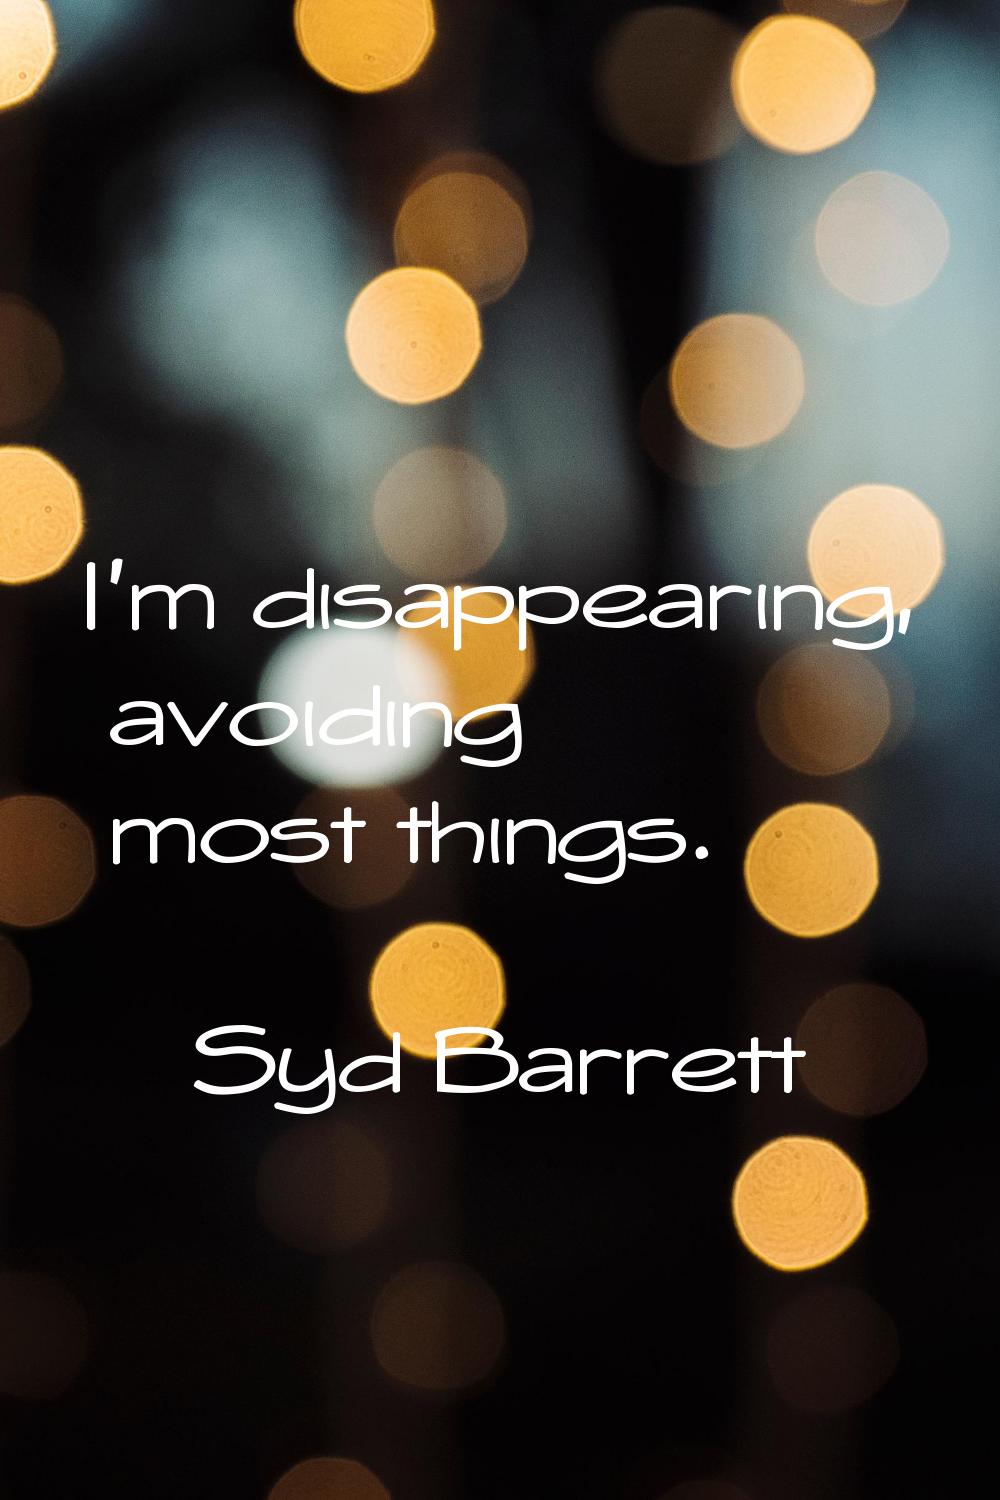 I'm disappearing, avoiding most things.